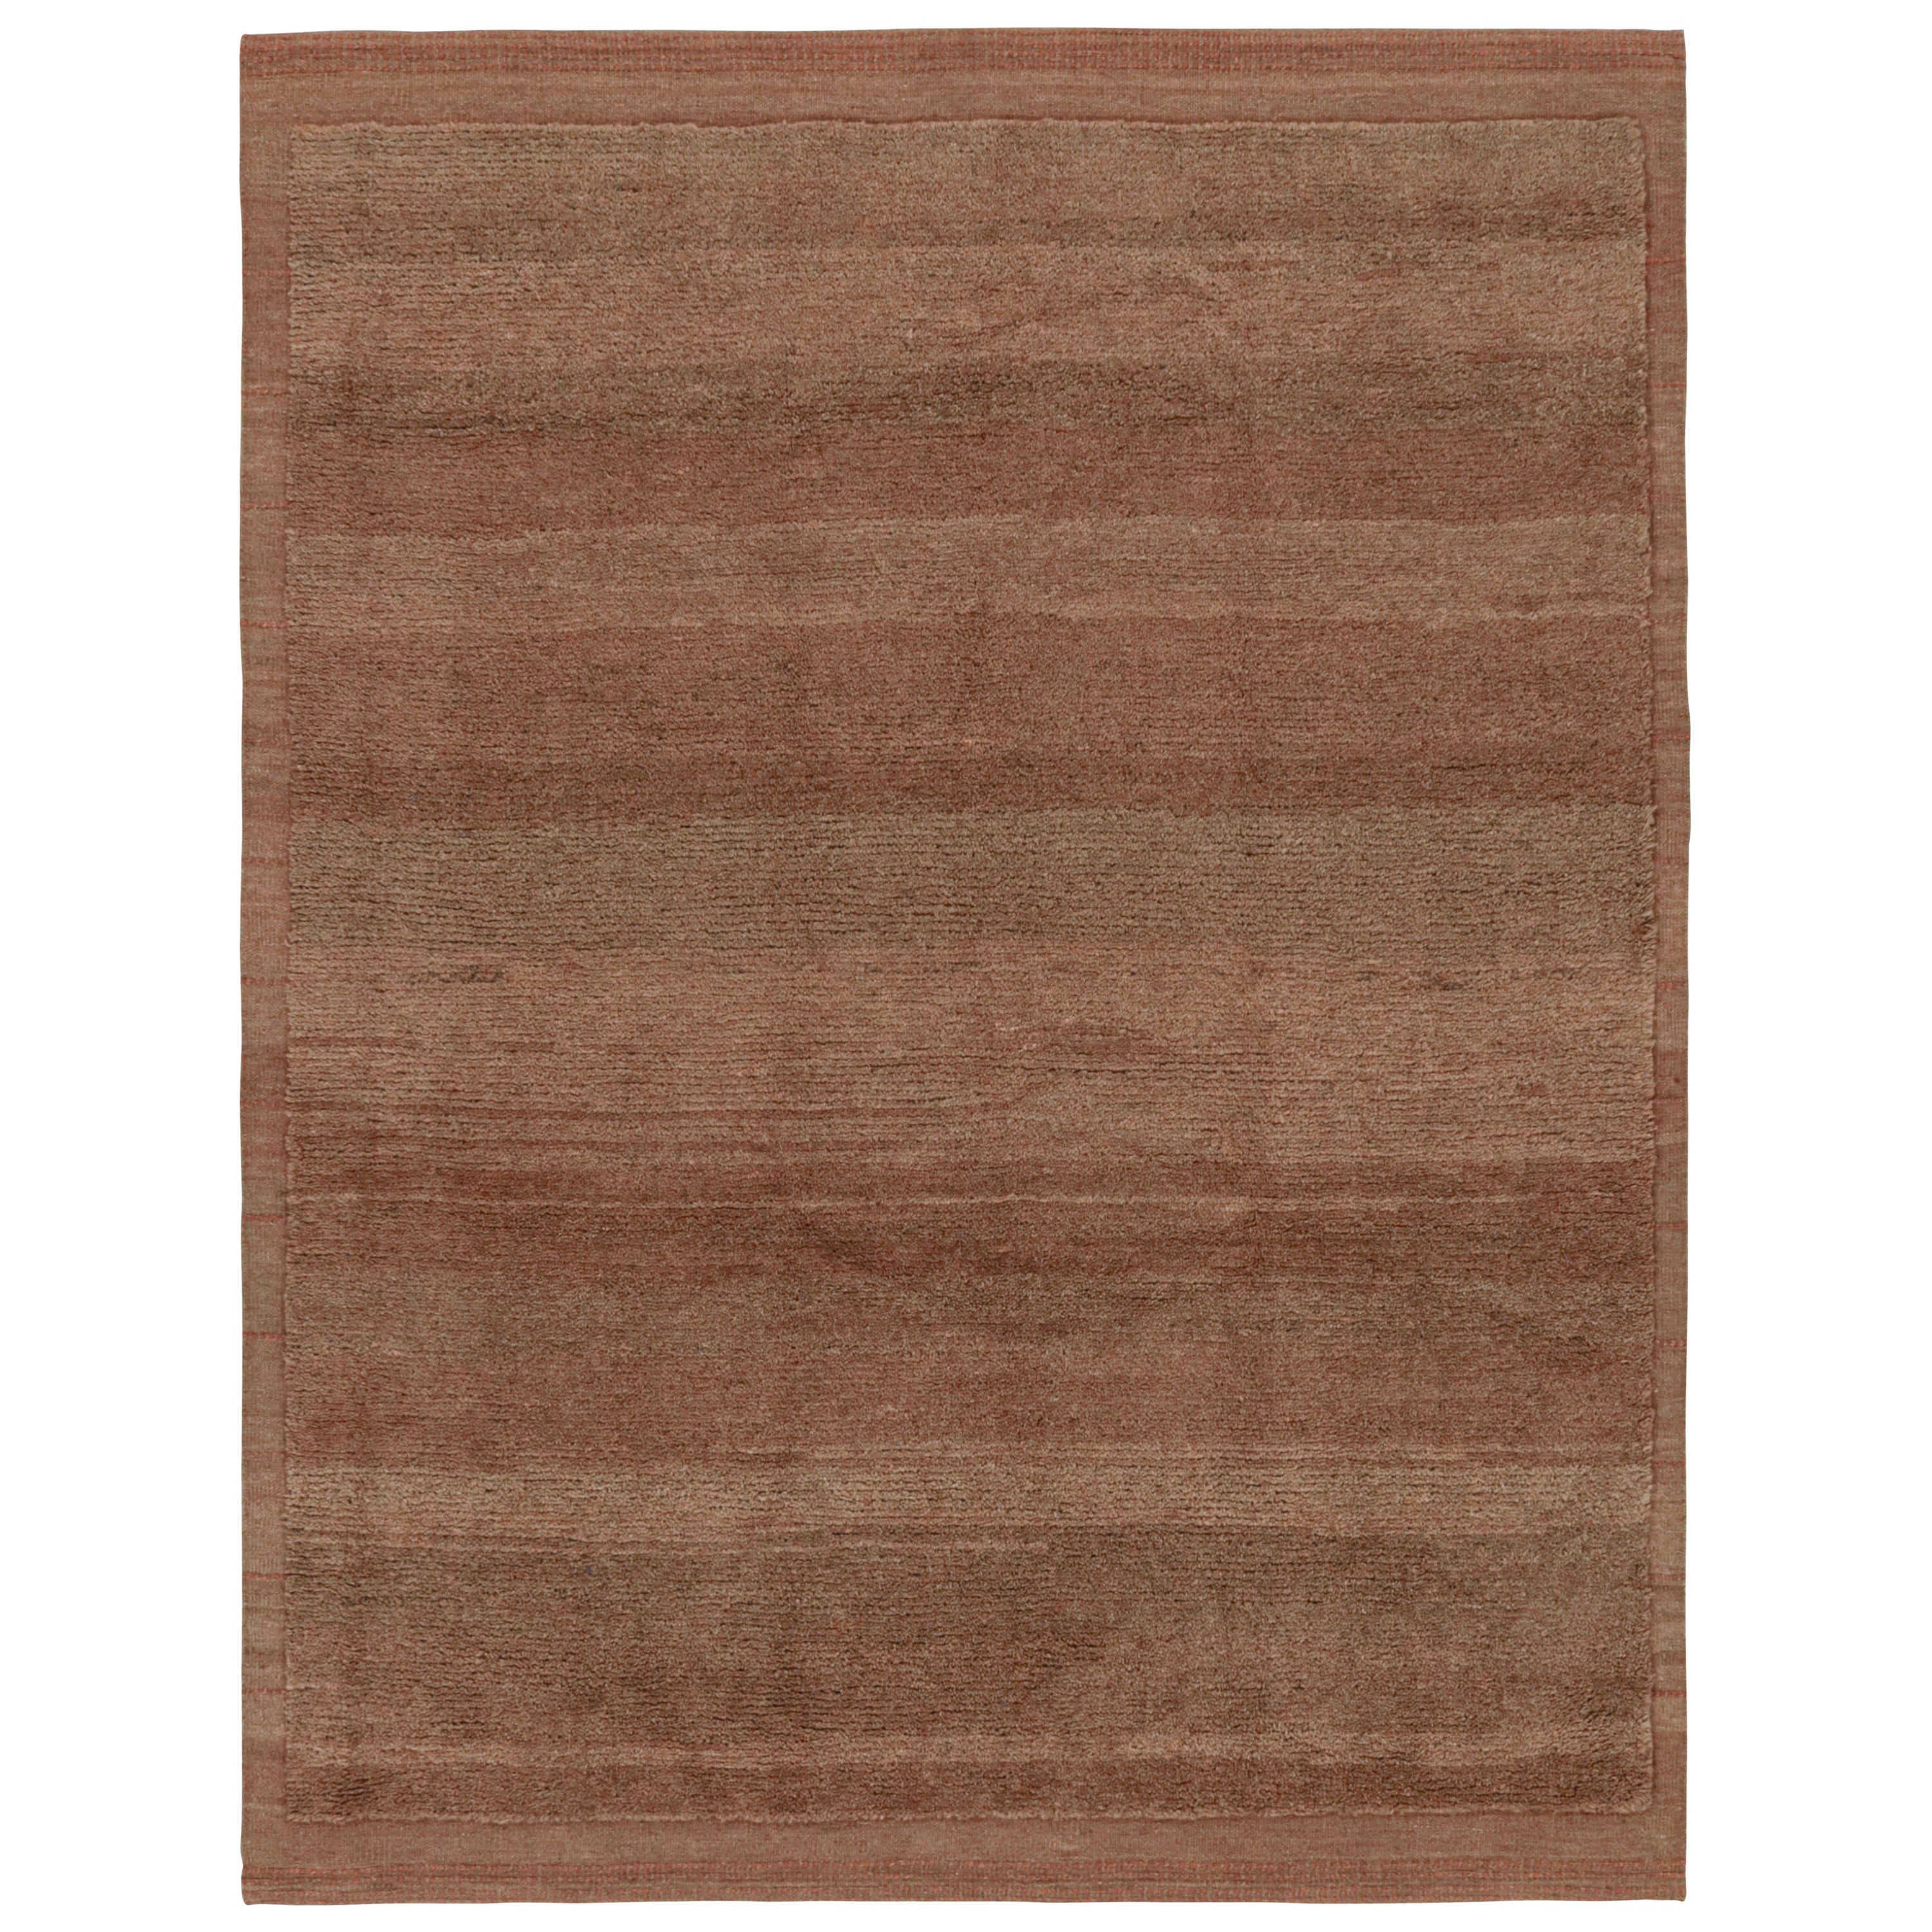 Rug & Kilim’s Modern Rug in Terracotta Tones and Striae with Brown Accents For Sale